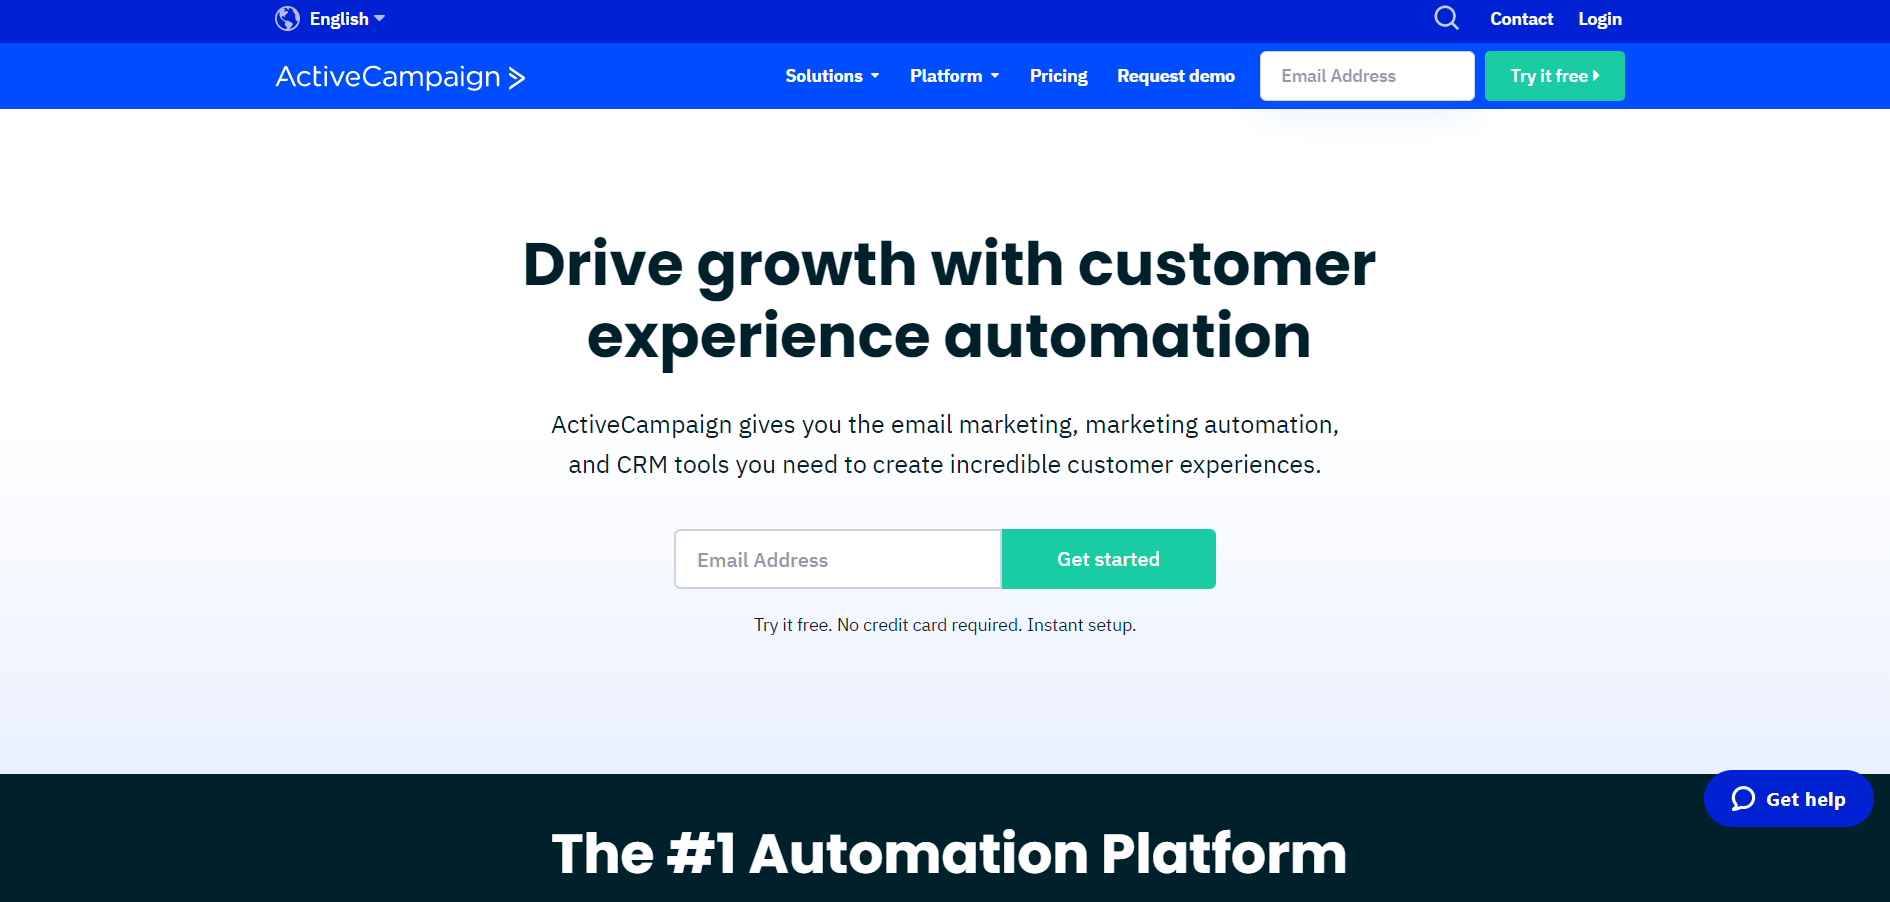 ActiveCampaign as a transactional email service provider